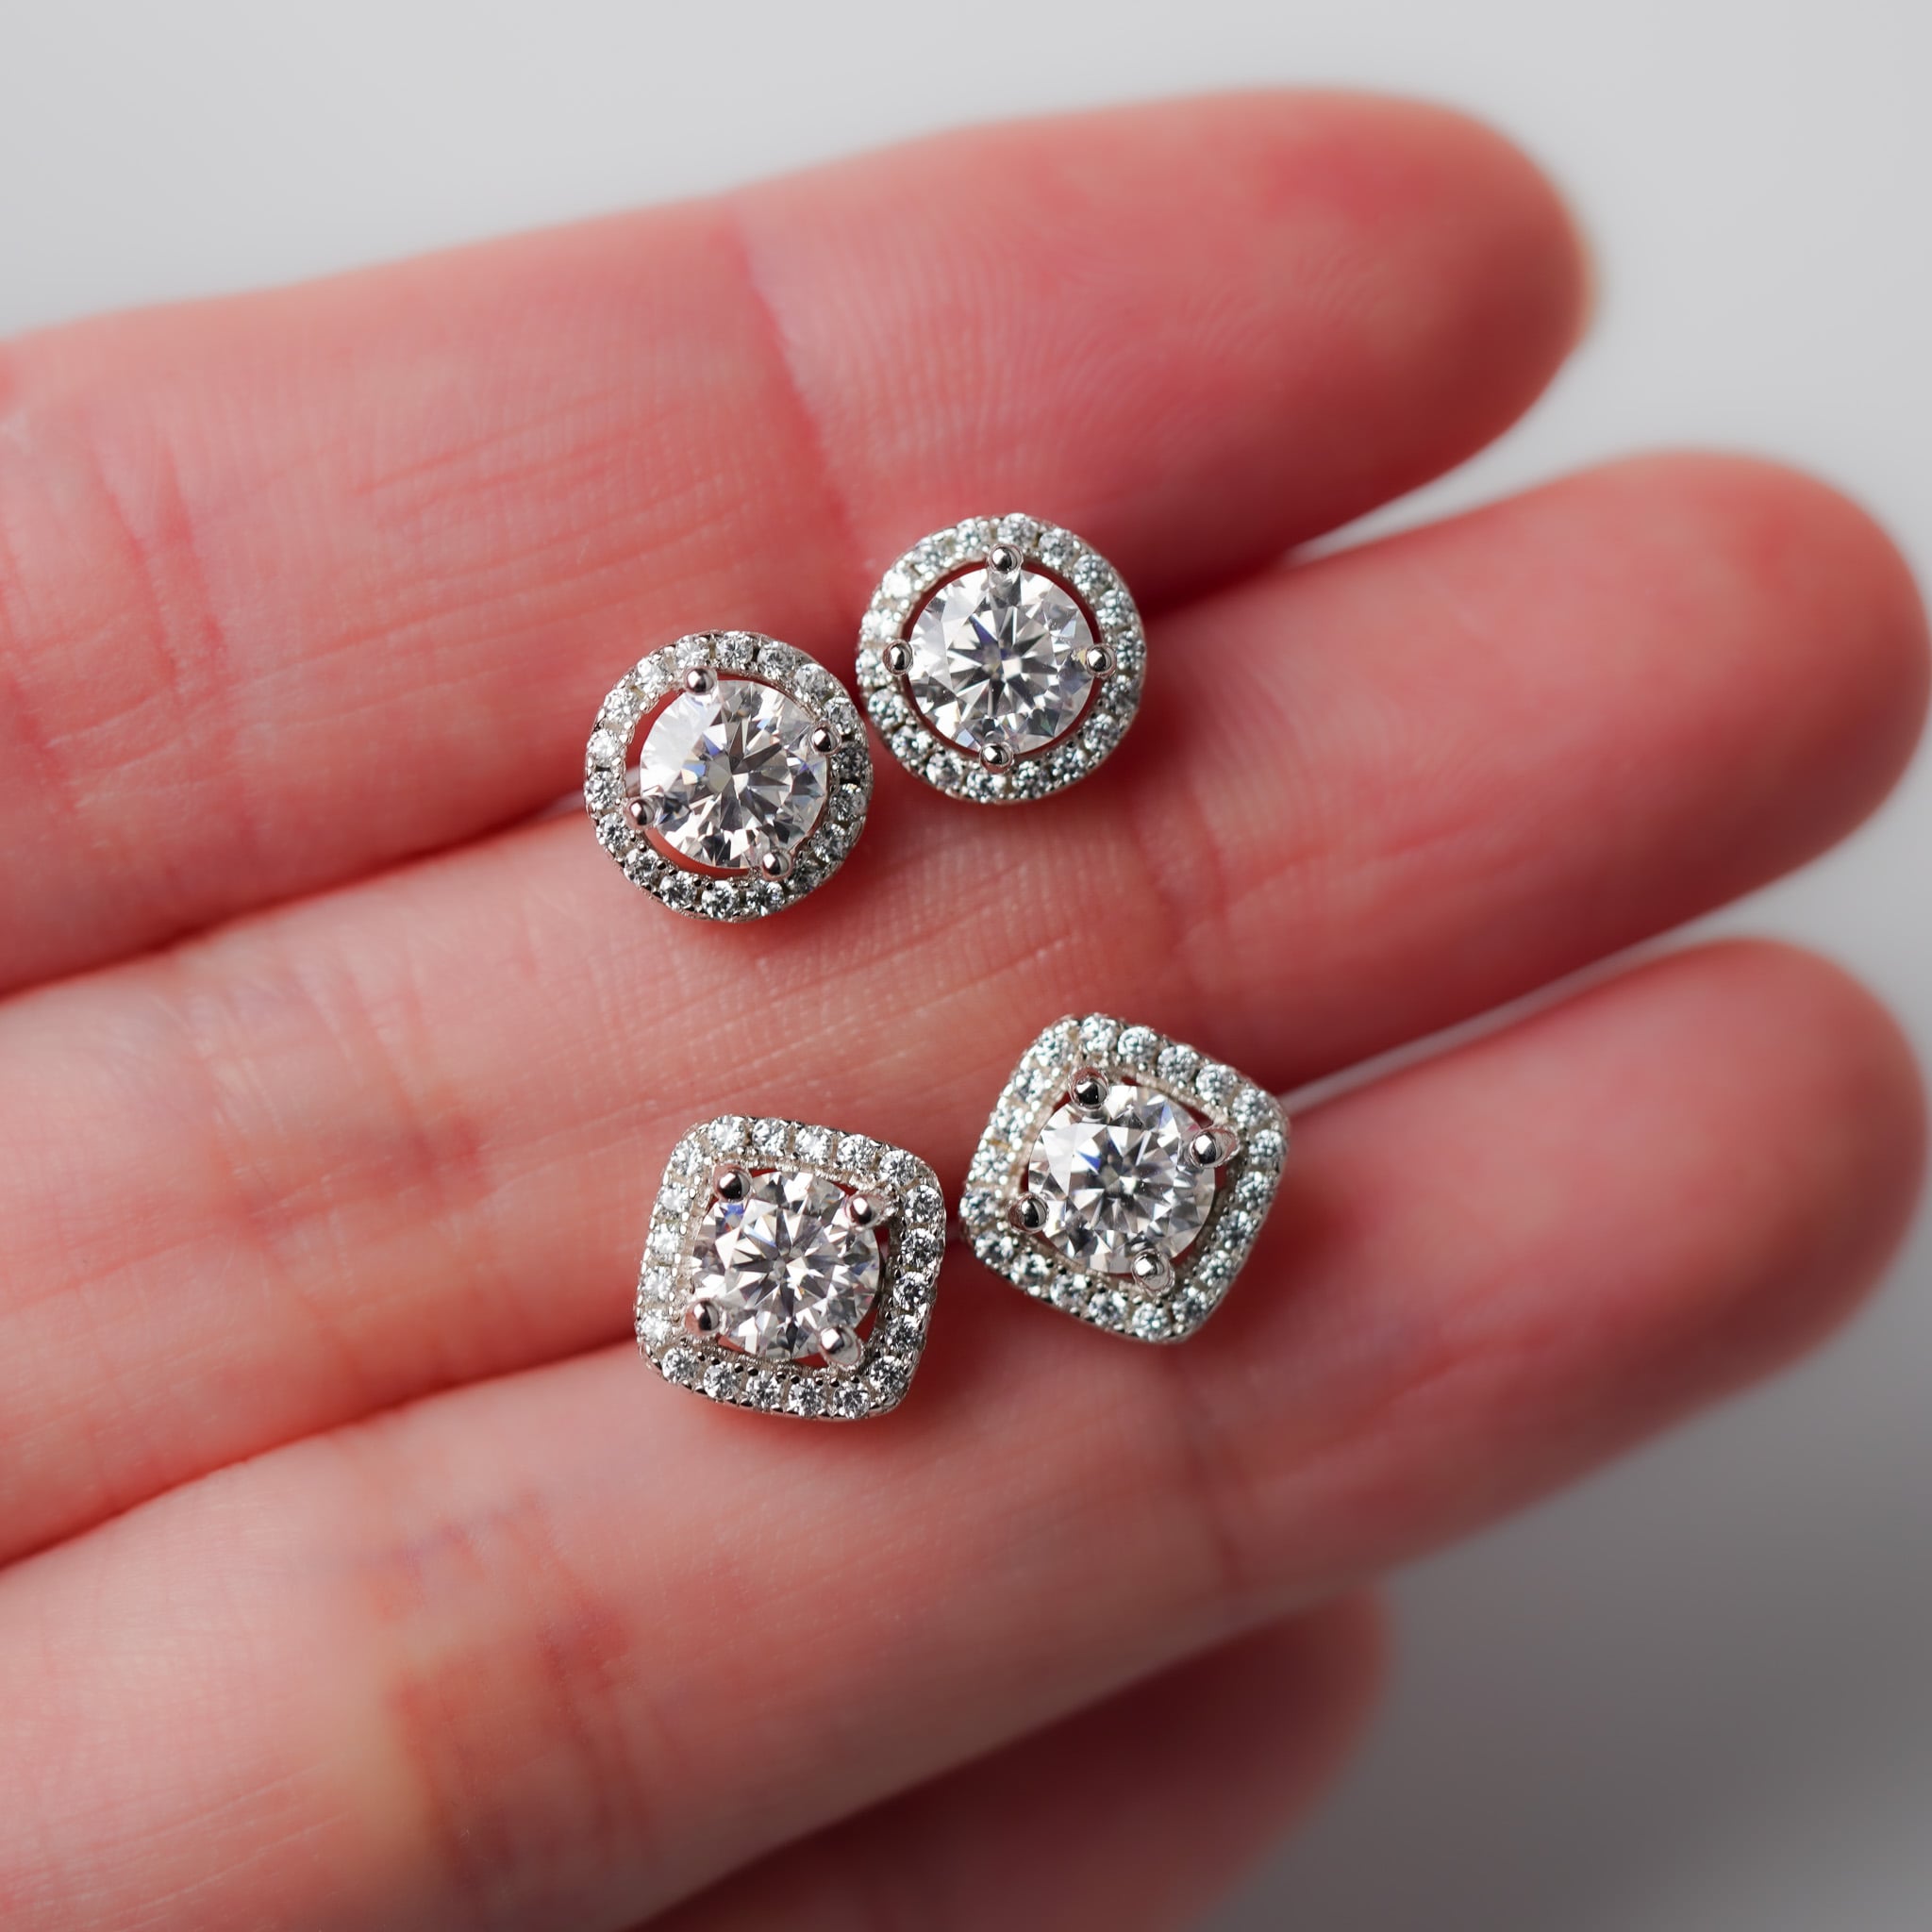 Moissanite Square Round Halo Earrings